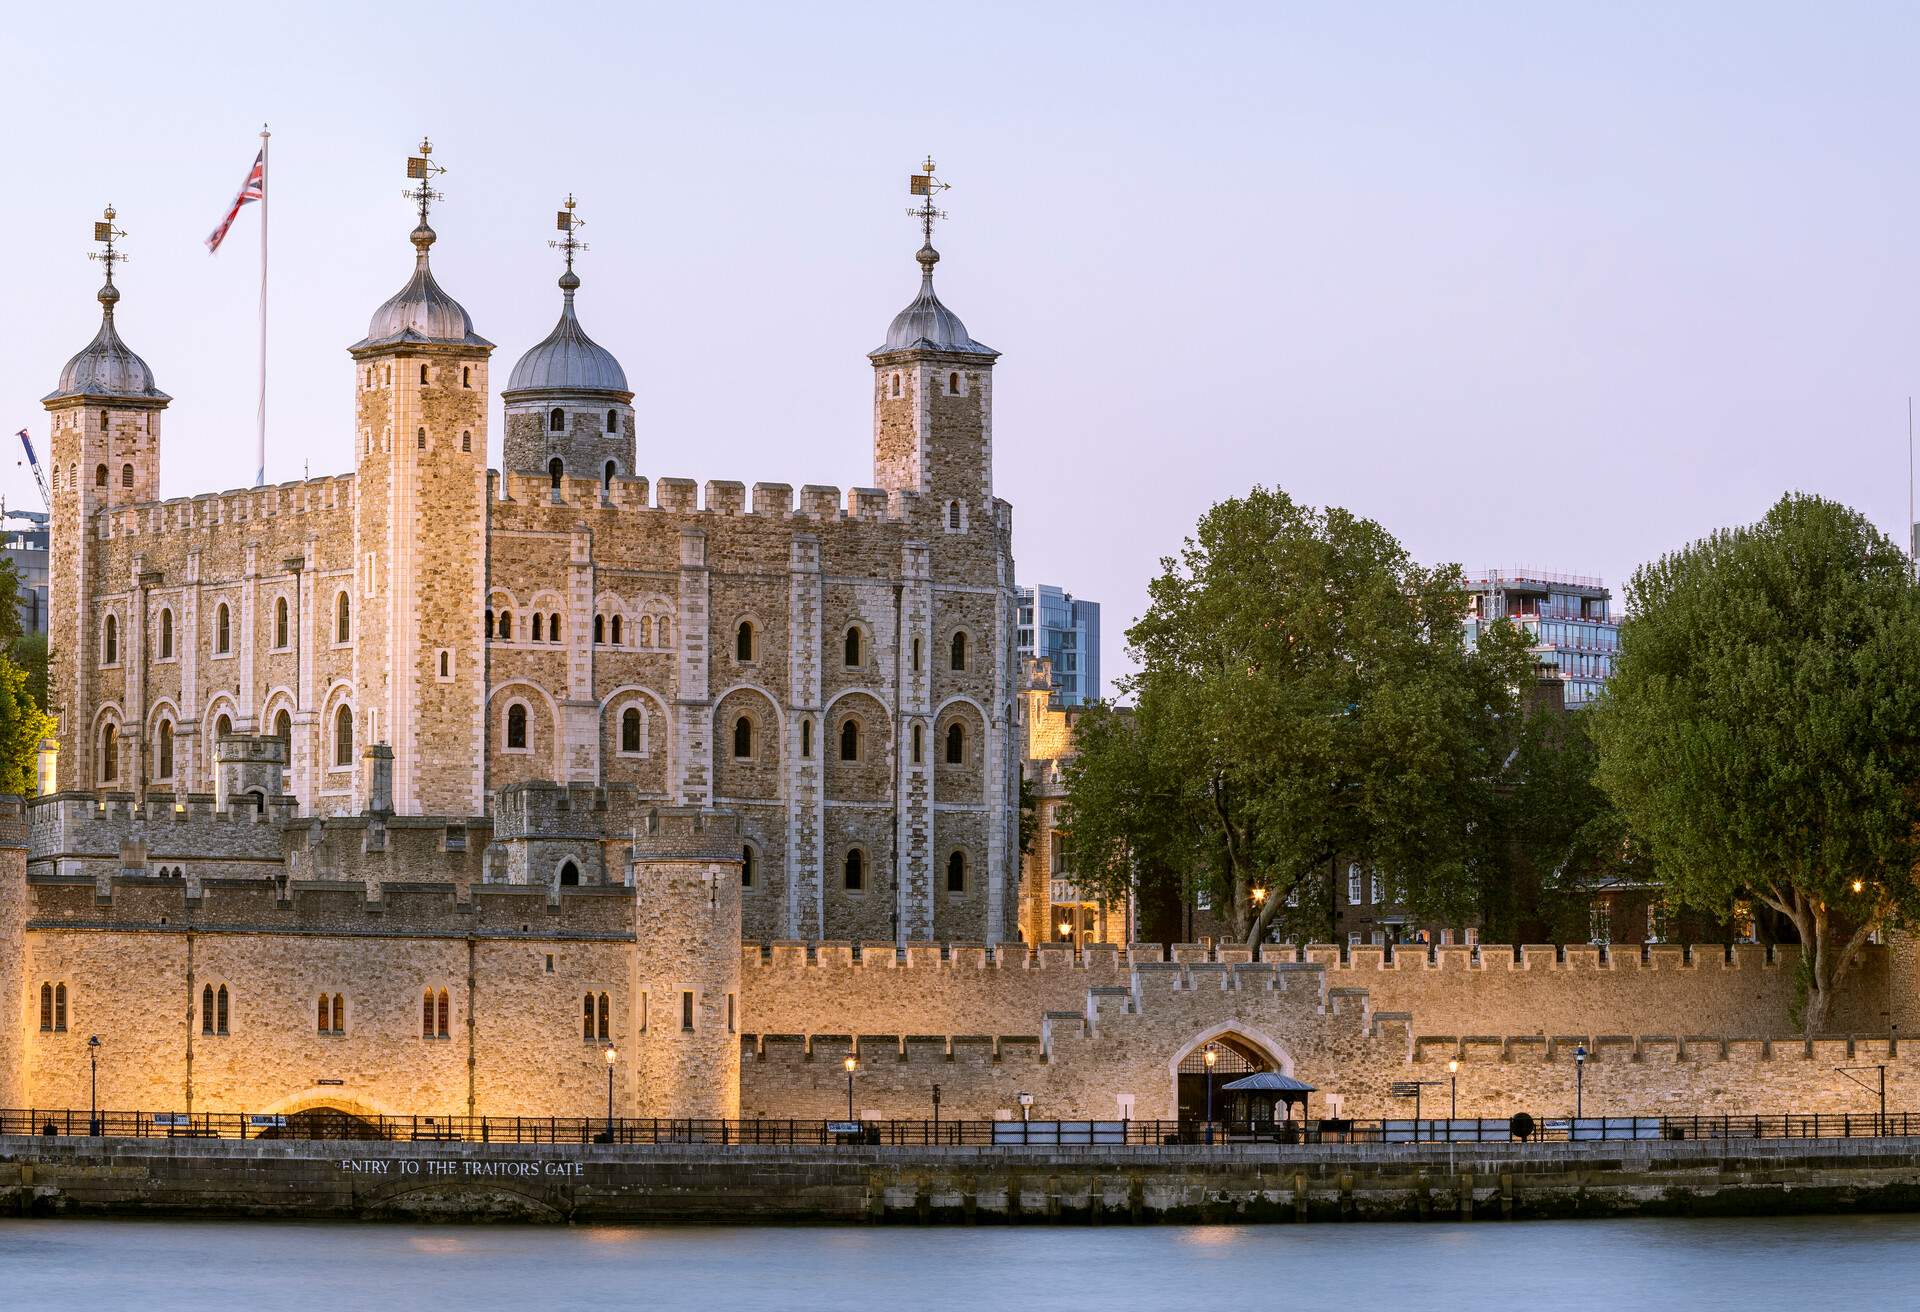 The Tower of London is an iconic castle with projecting four corner towers guarded by defensive walls on the river bank.